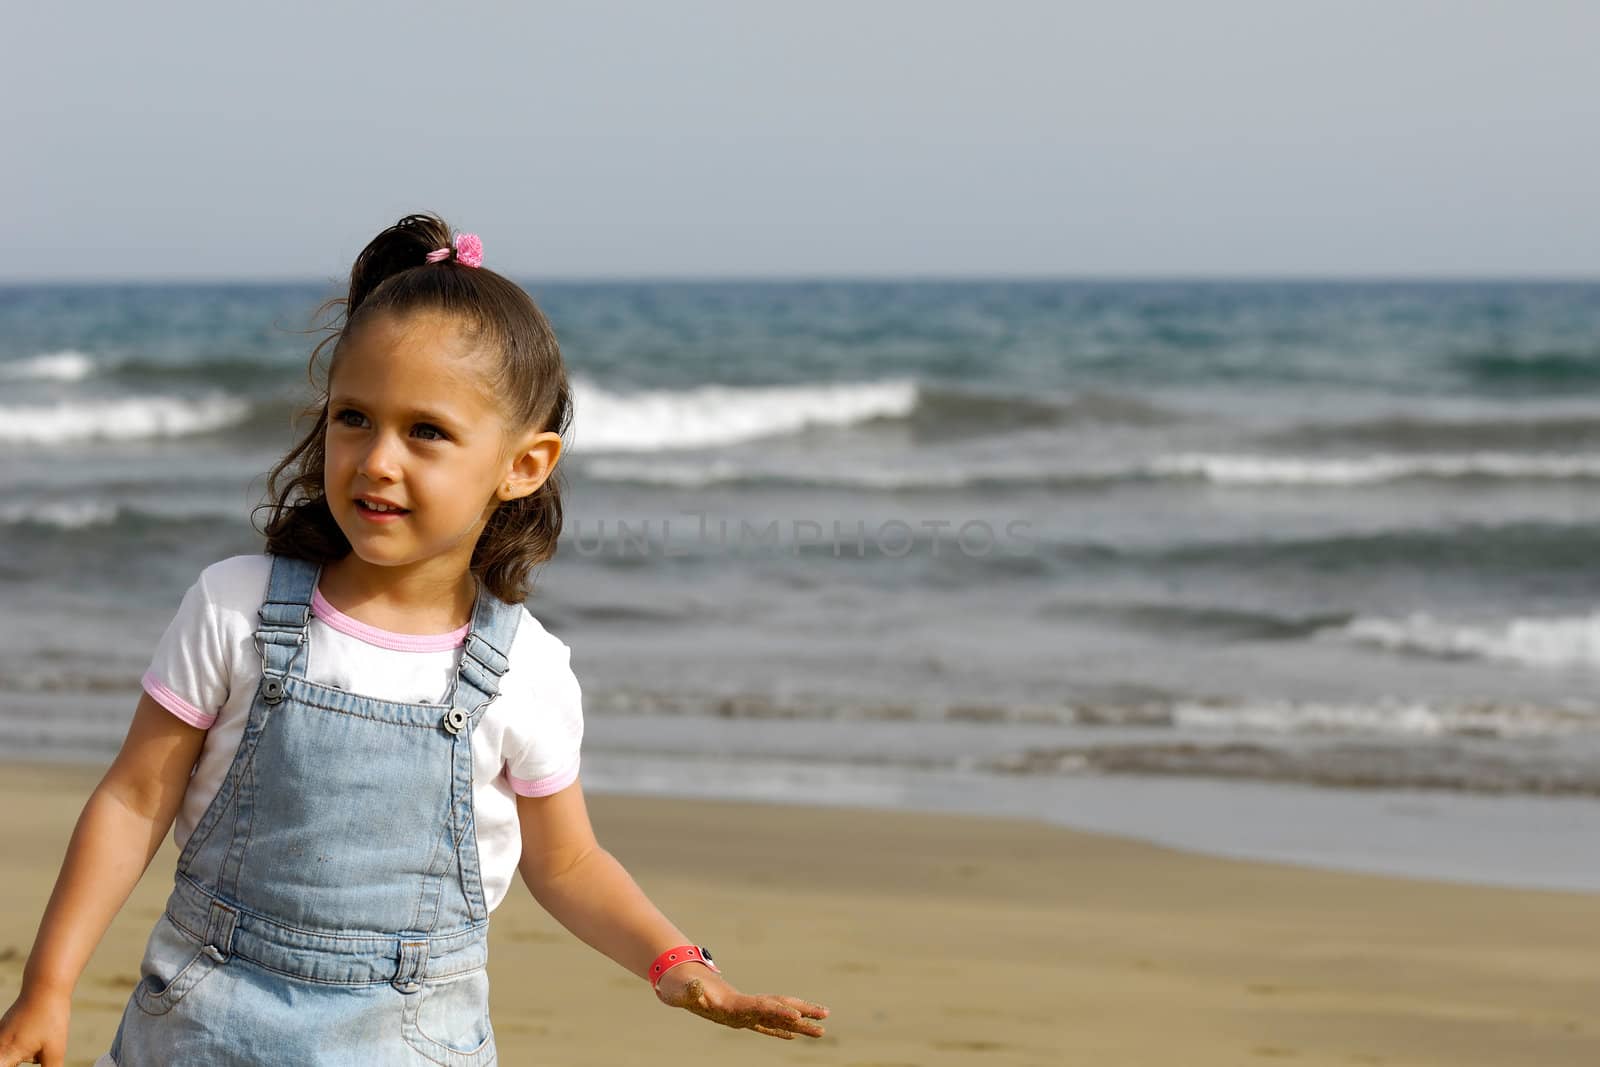 A sweet happy child on the beach.